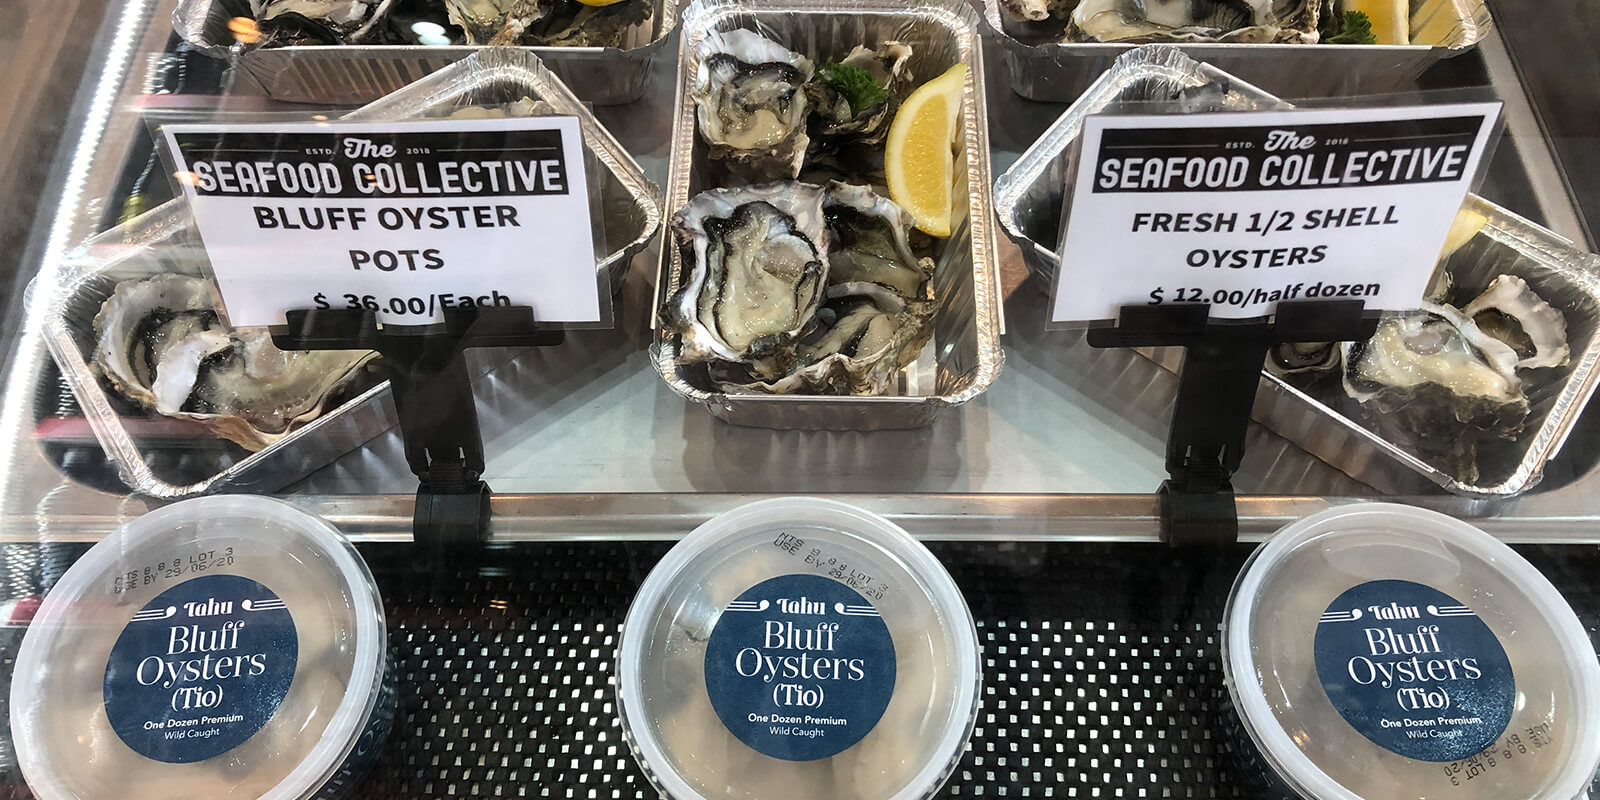 Difference between Bluff & Pacific Oysters